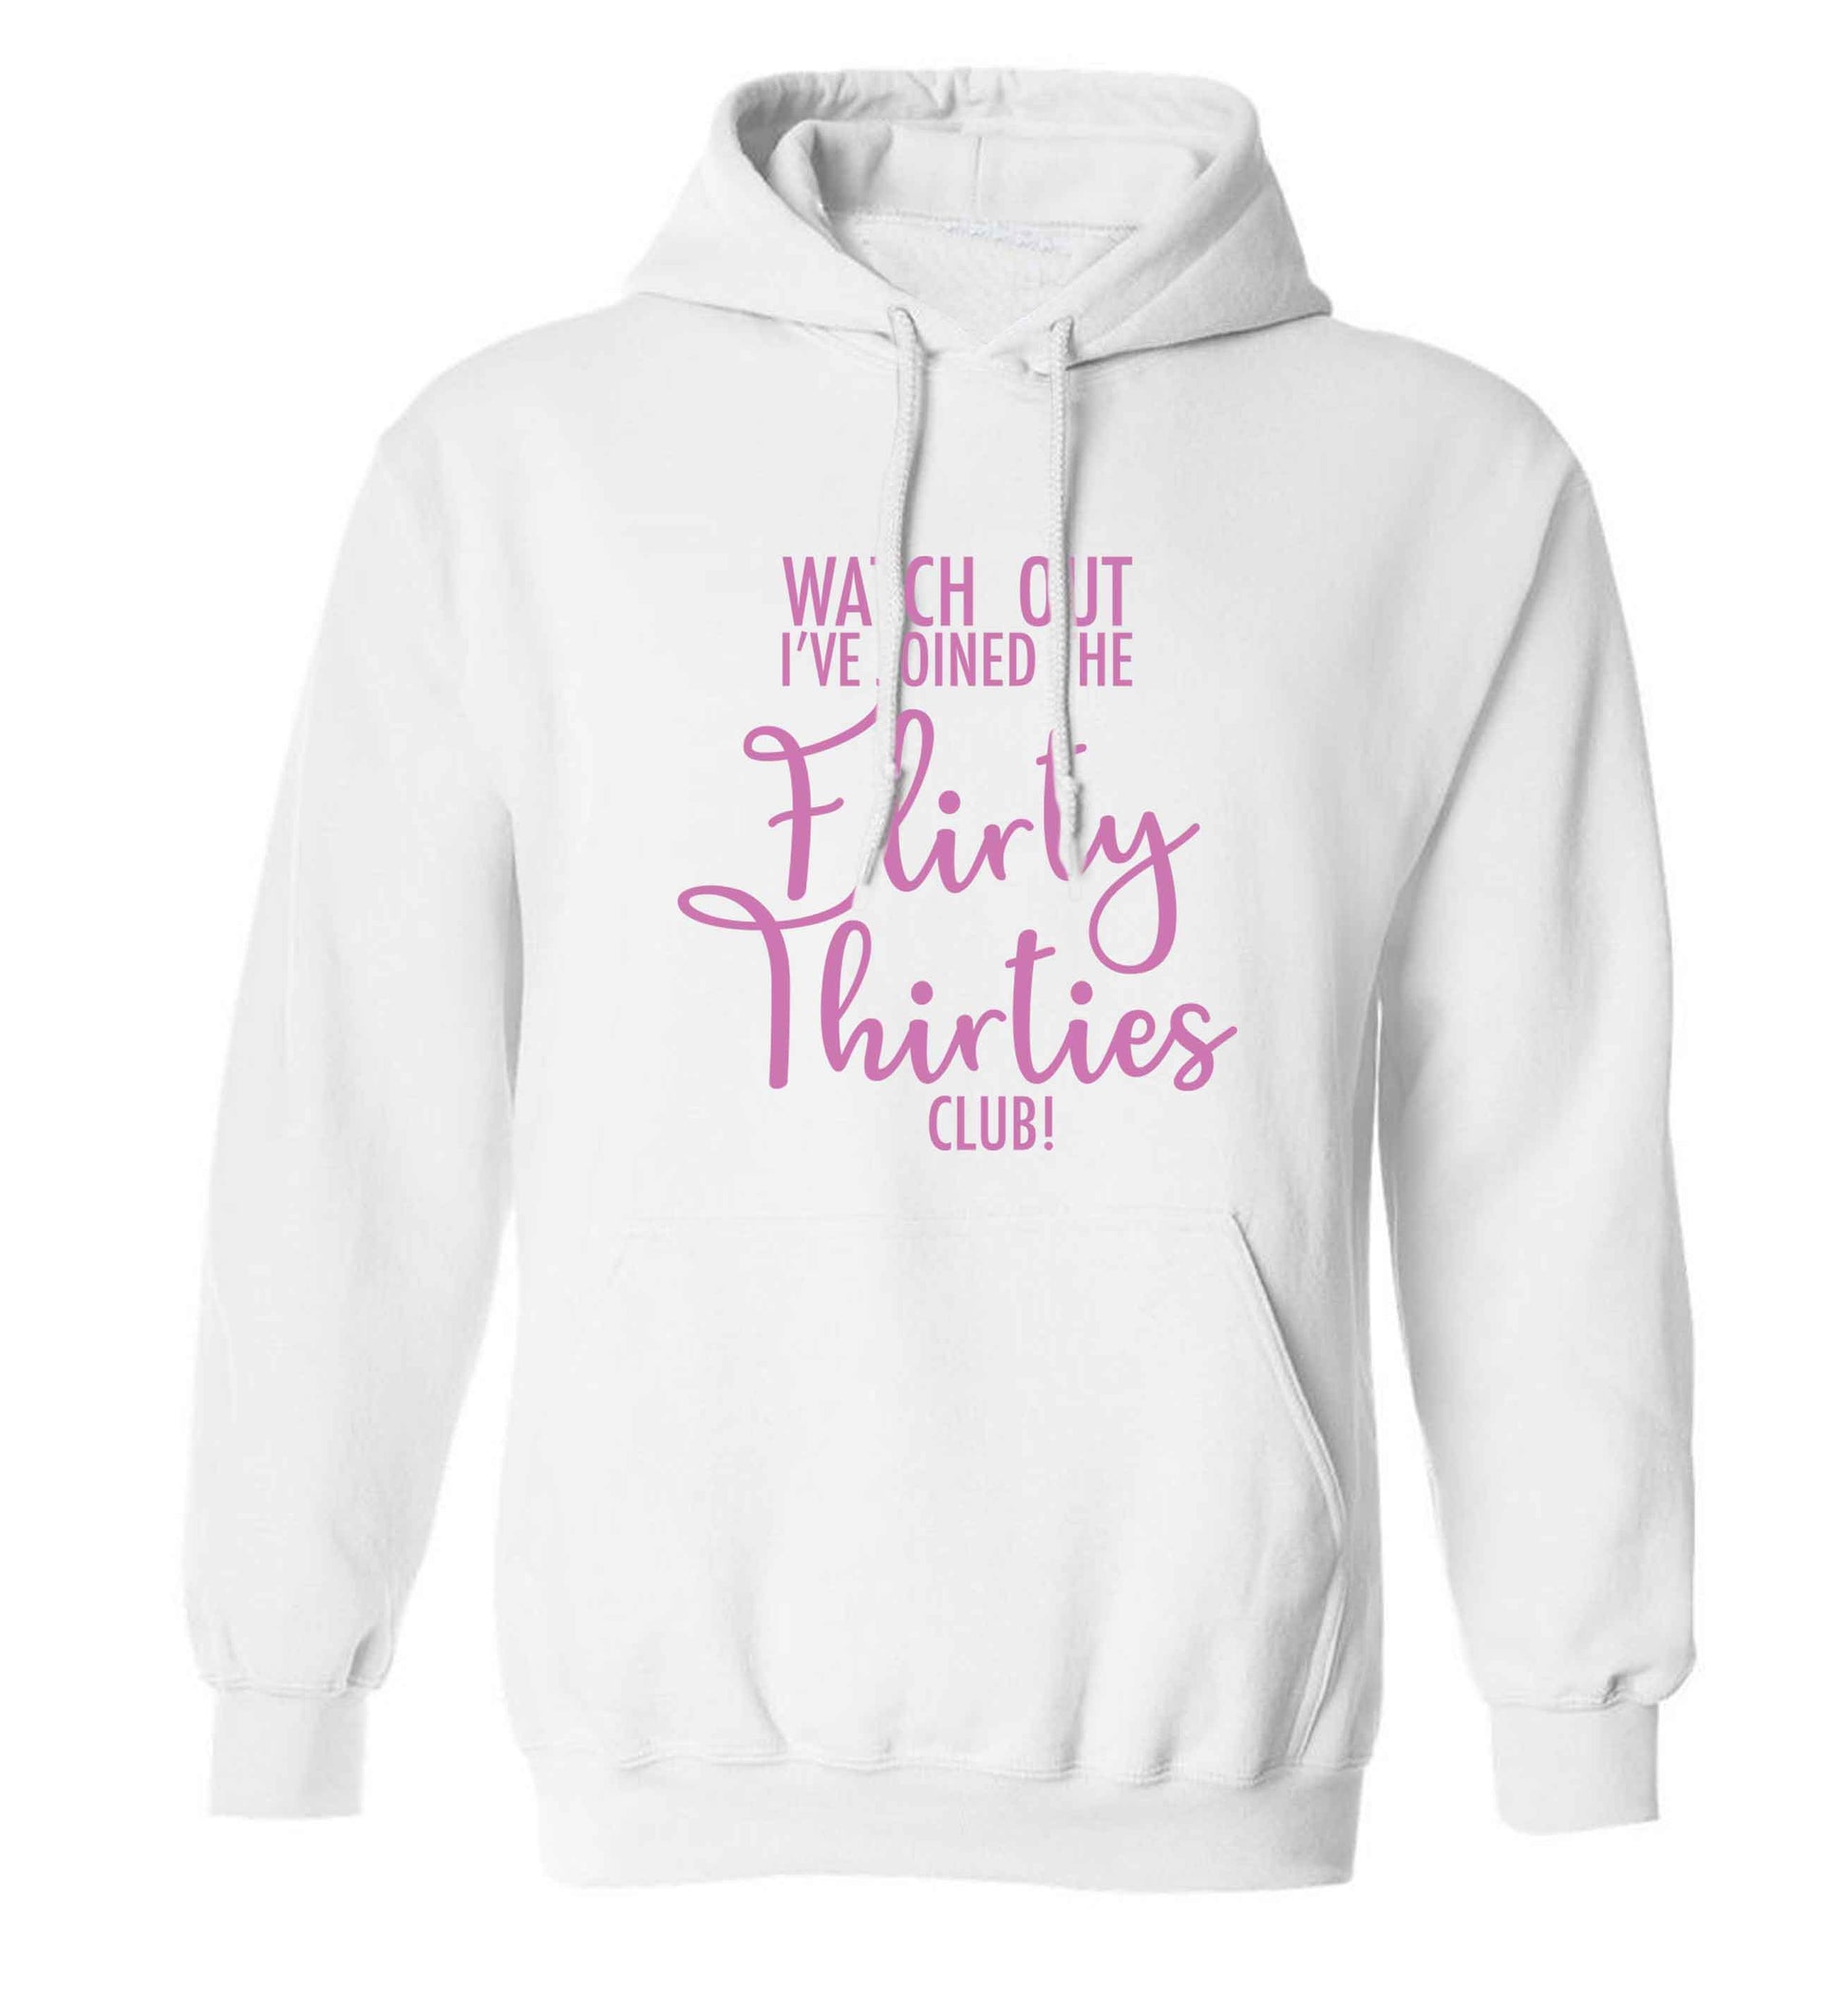 Watch out I've joined the flirty thirties club adults unisex white hoodie 2XL